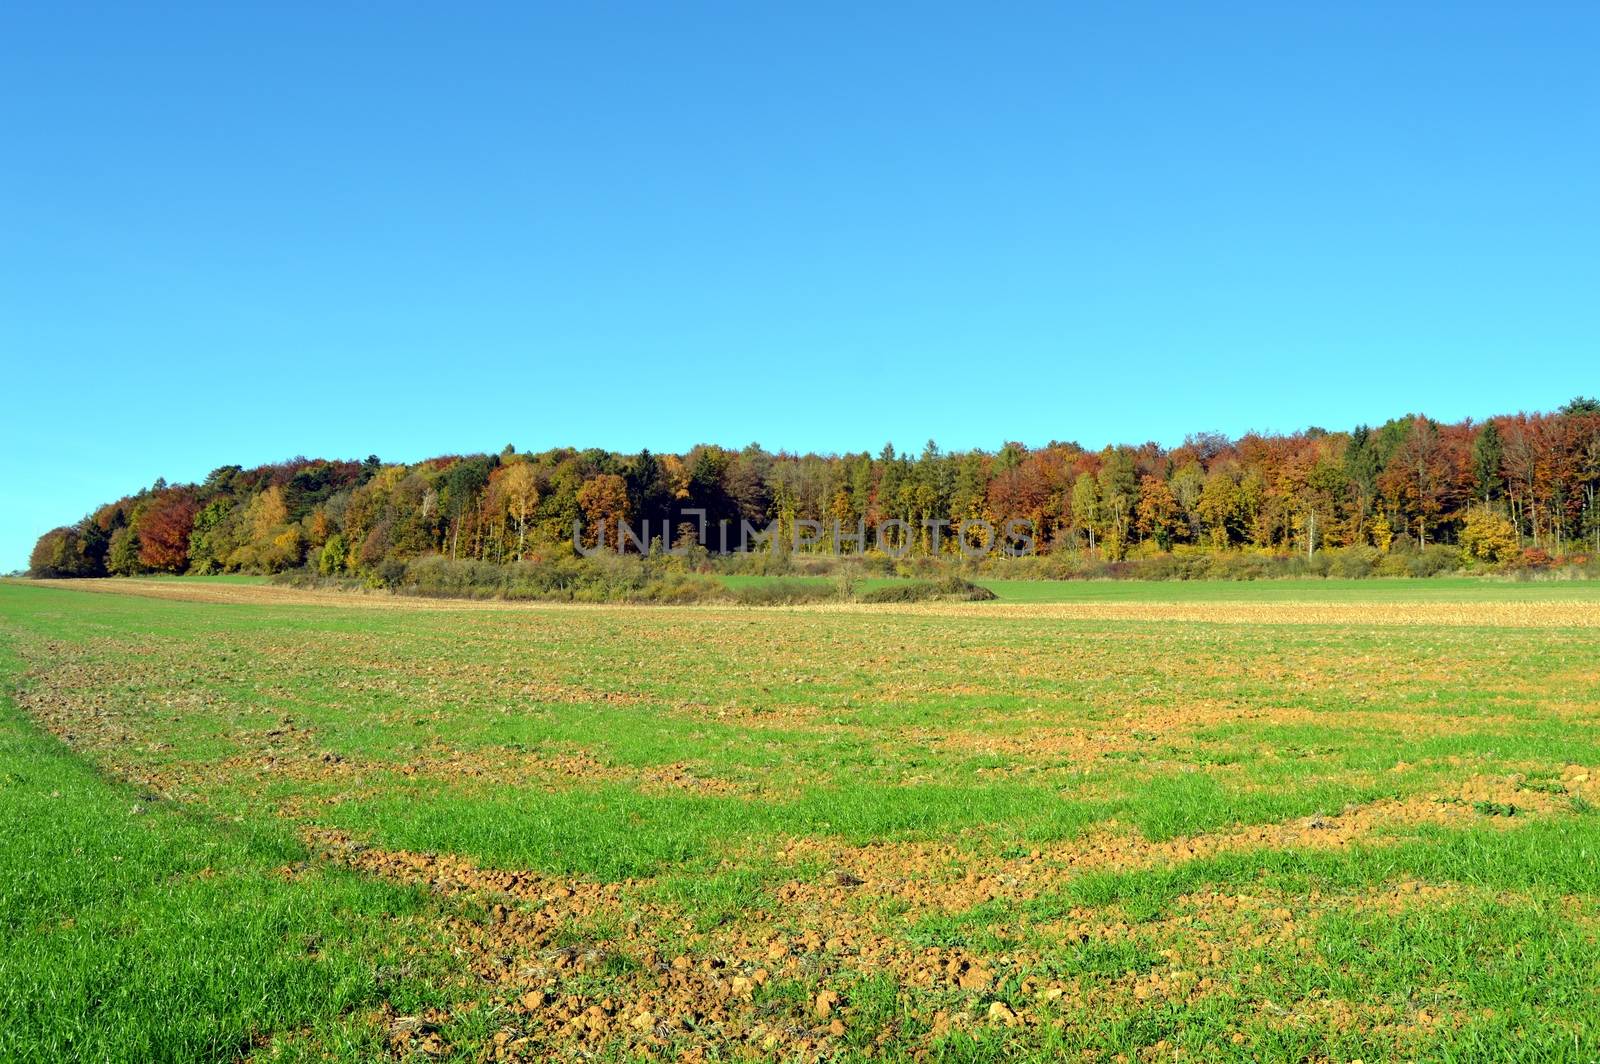 plow fields with autumn trees in the background